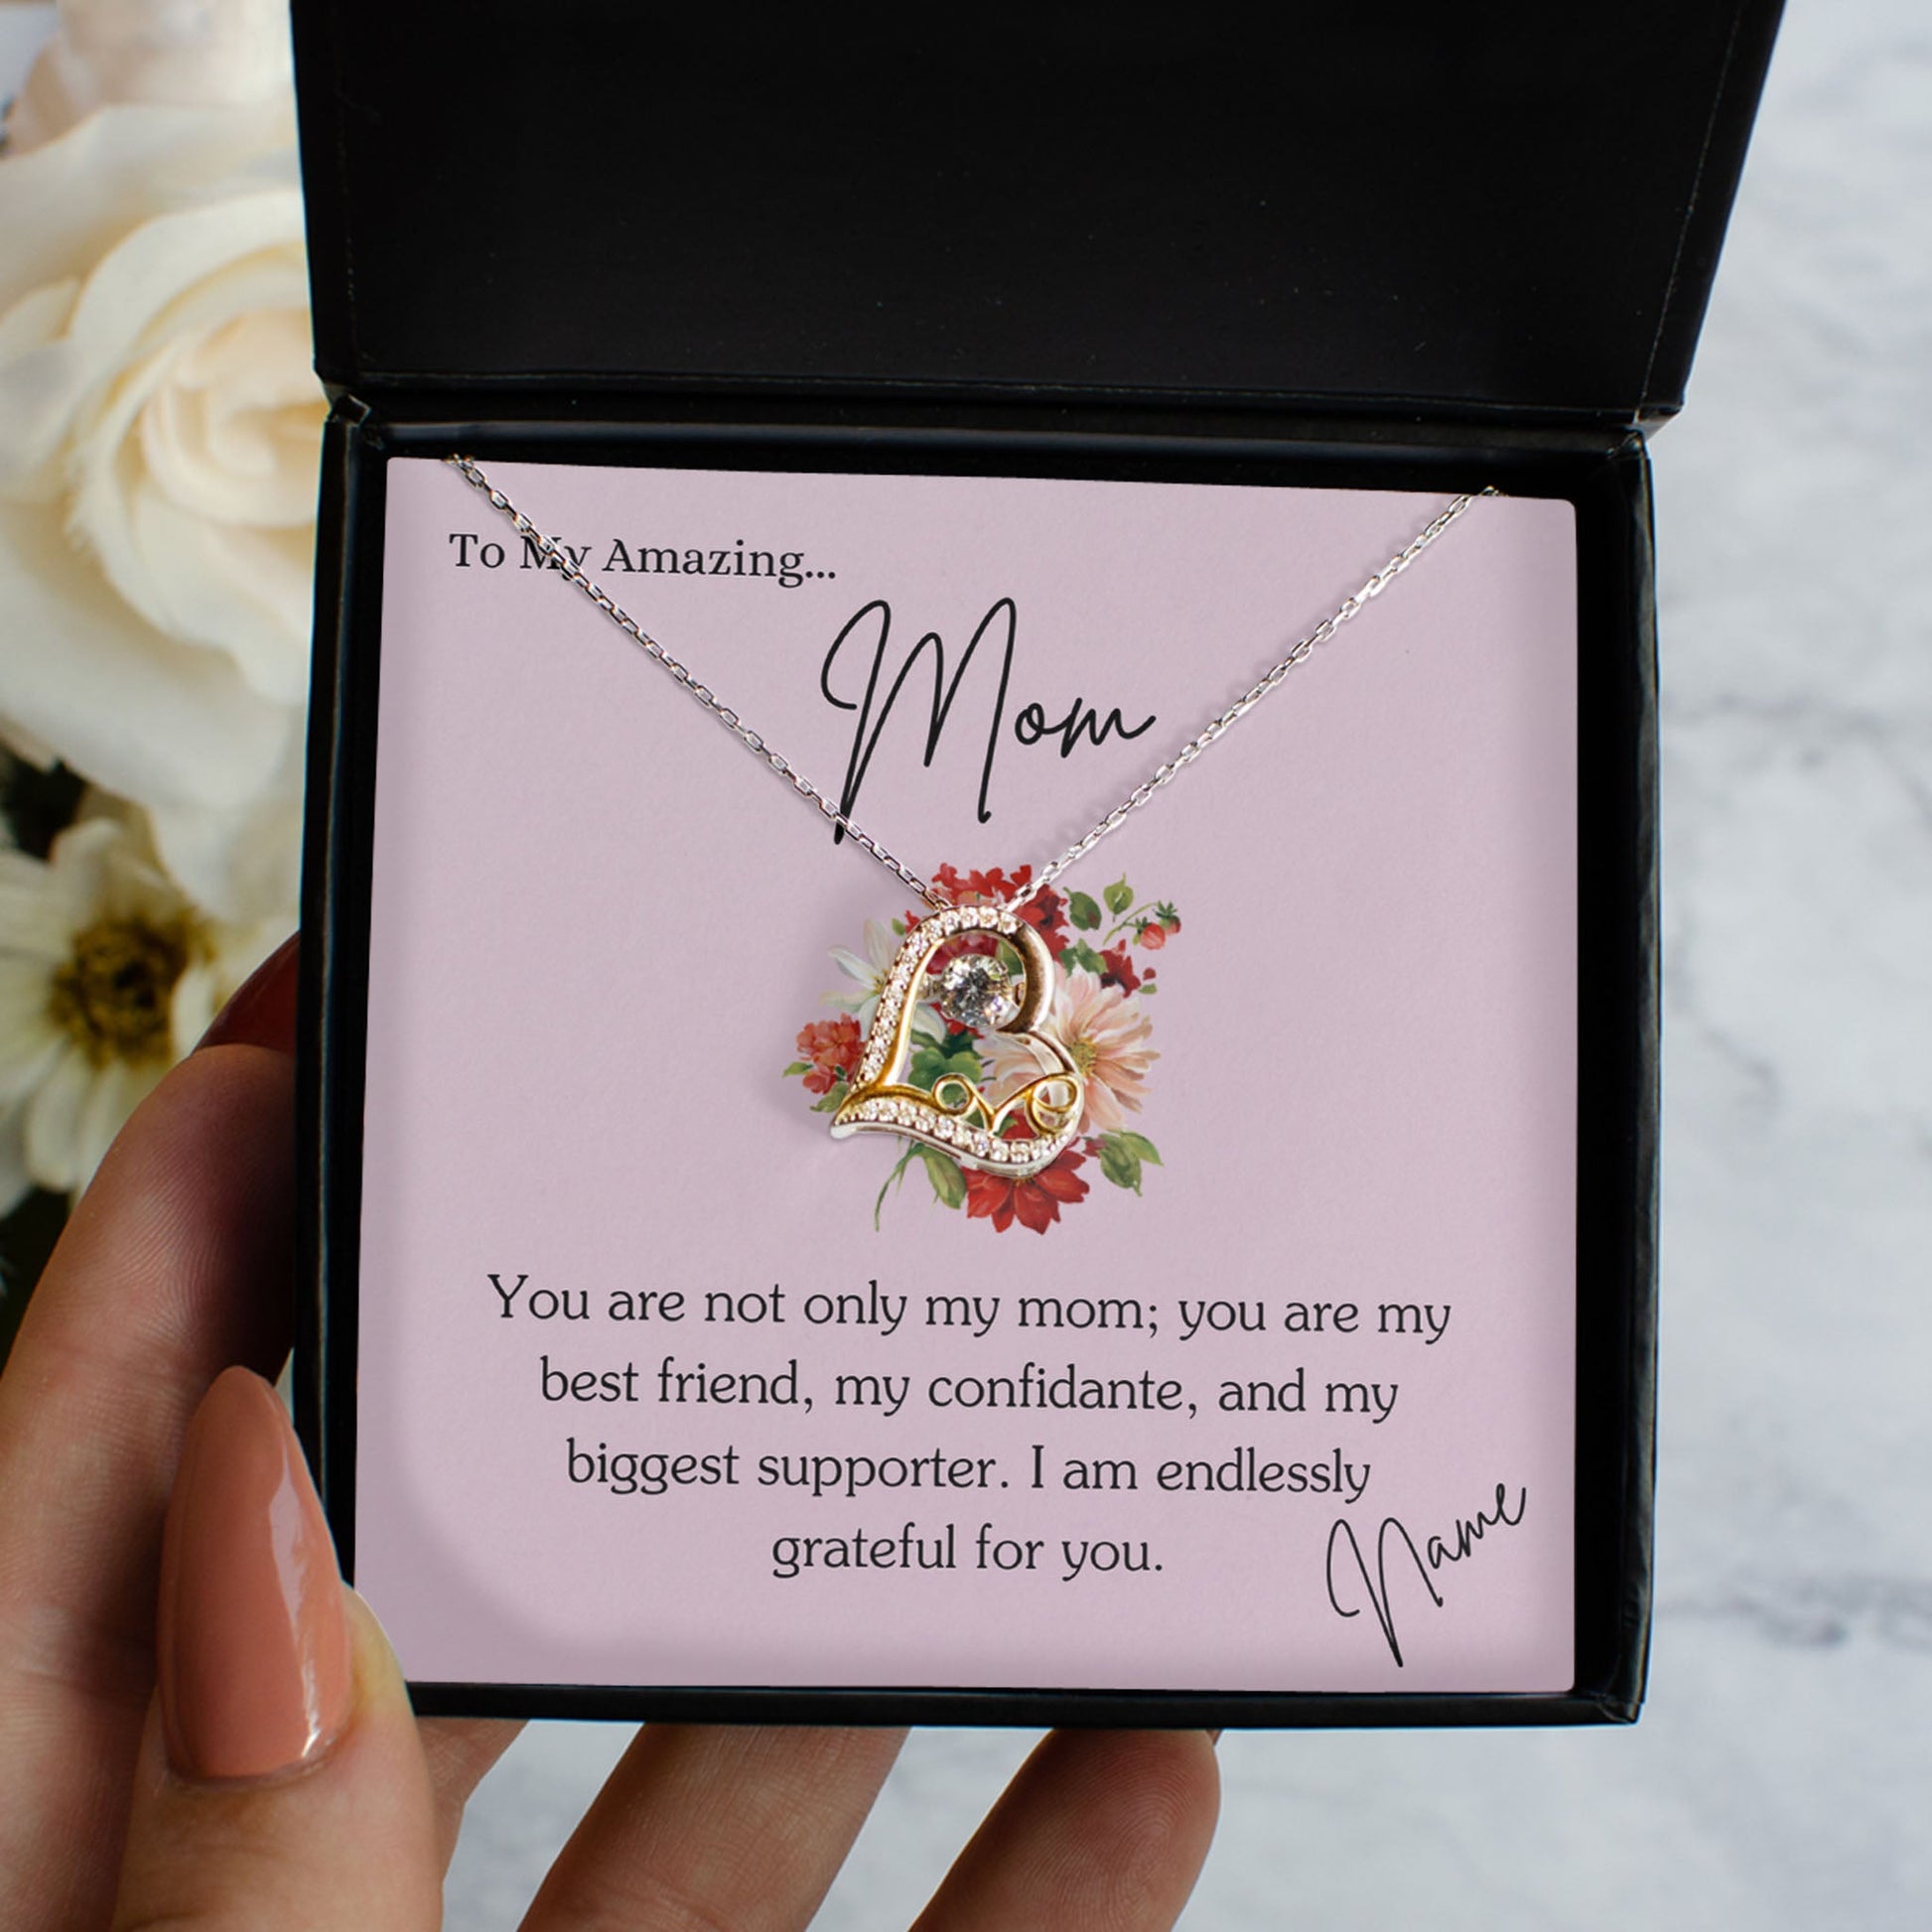 Personalized Necklaces + Message Cards - Zirconia Heart Necklace With Mom Card Insert 